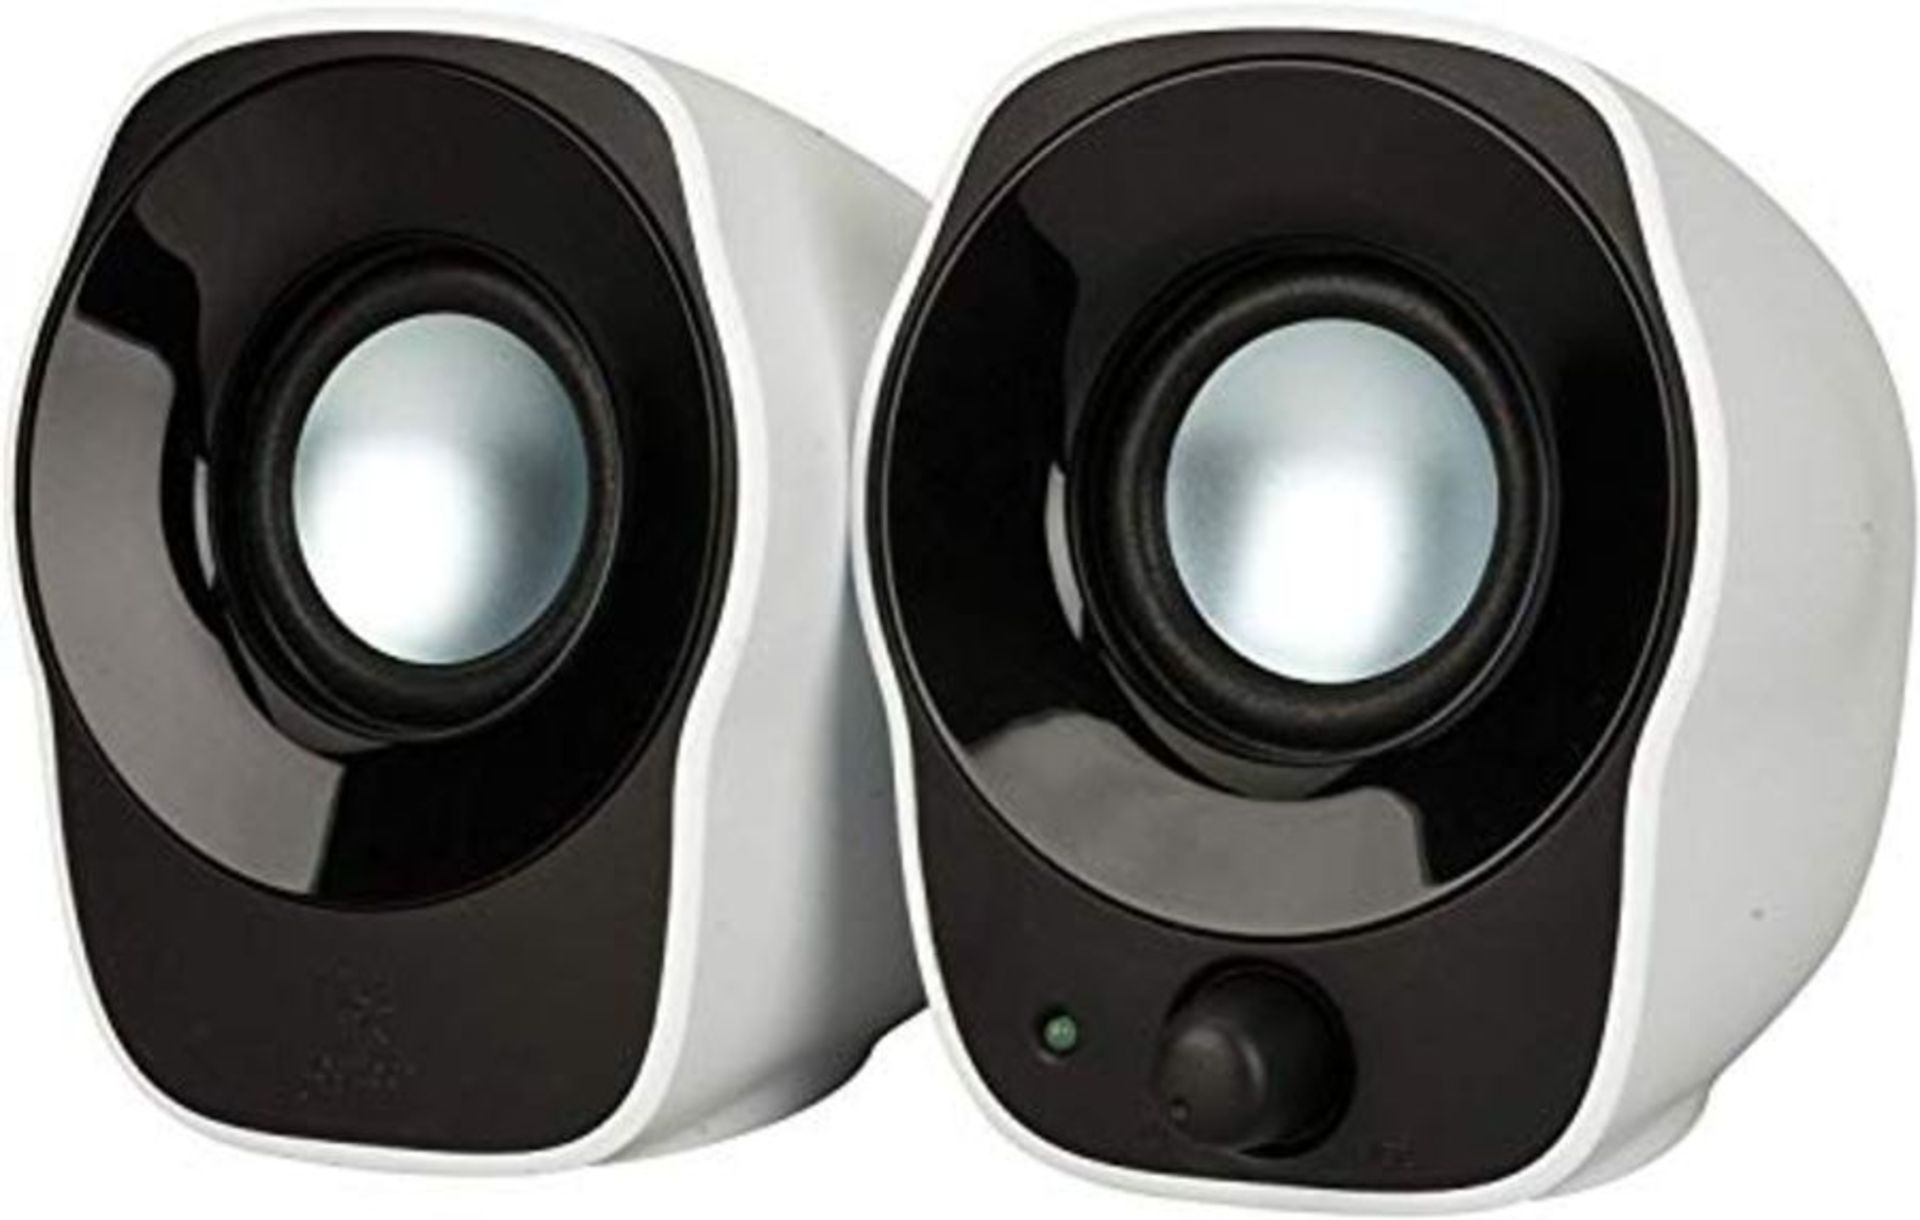 Logitech Z120 Compact PC Stereo Speakers, 3.5mm Audio Input, USB Powered, Integrated C